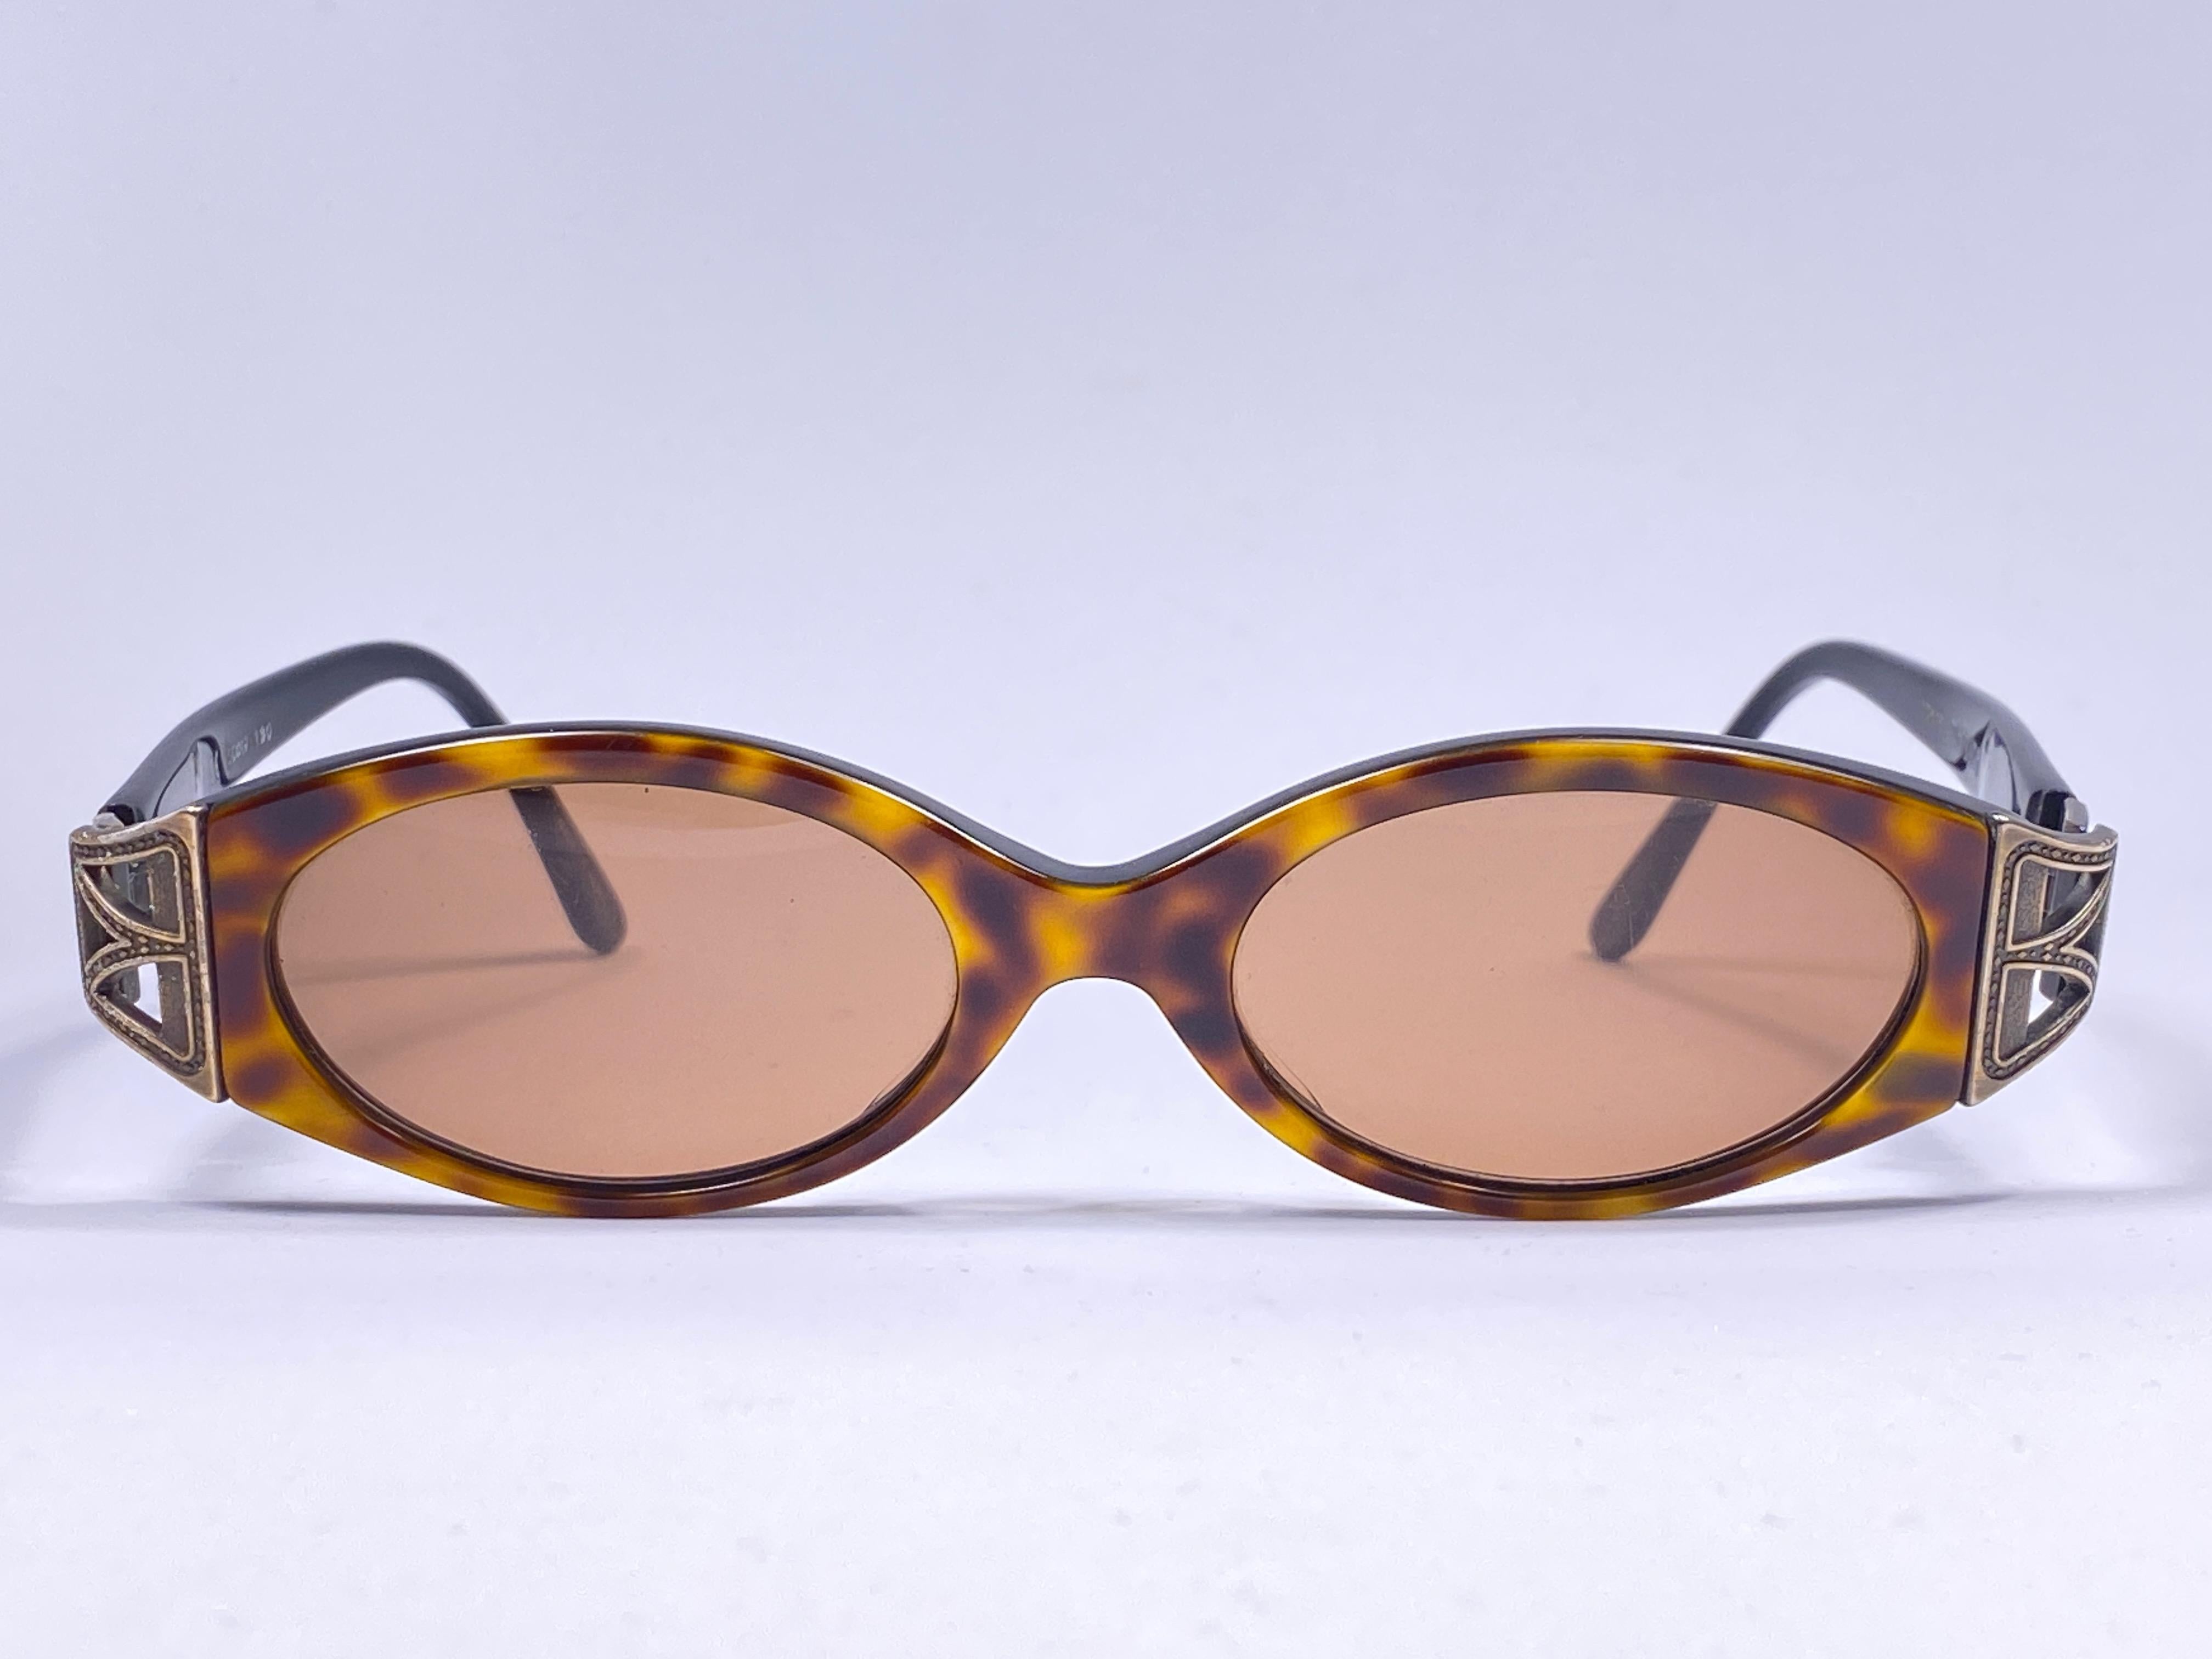 Cult brand Matsuda signed this ultra chic pair of hexagonal tortoise with copper accents sunglasses. 

Spotless medium brown lenses.

Superior quality and design. 

This item show minor sign of wear due to storage.

MEASUREMENTS 

FRONT : 13.5 CMS